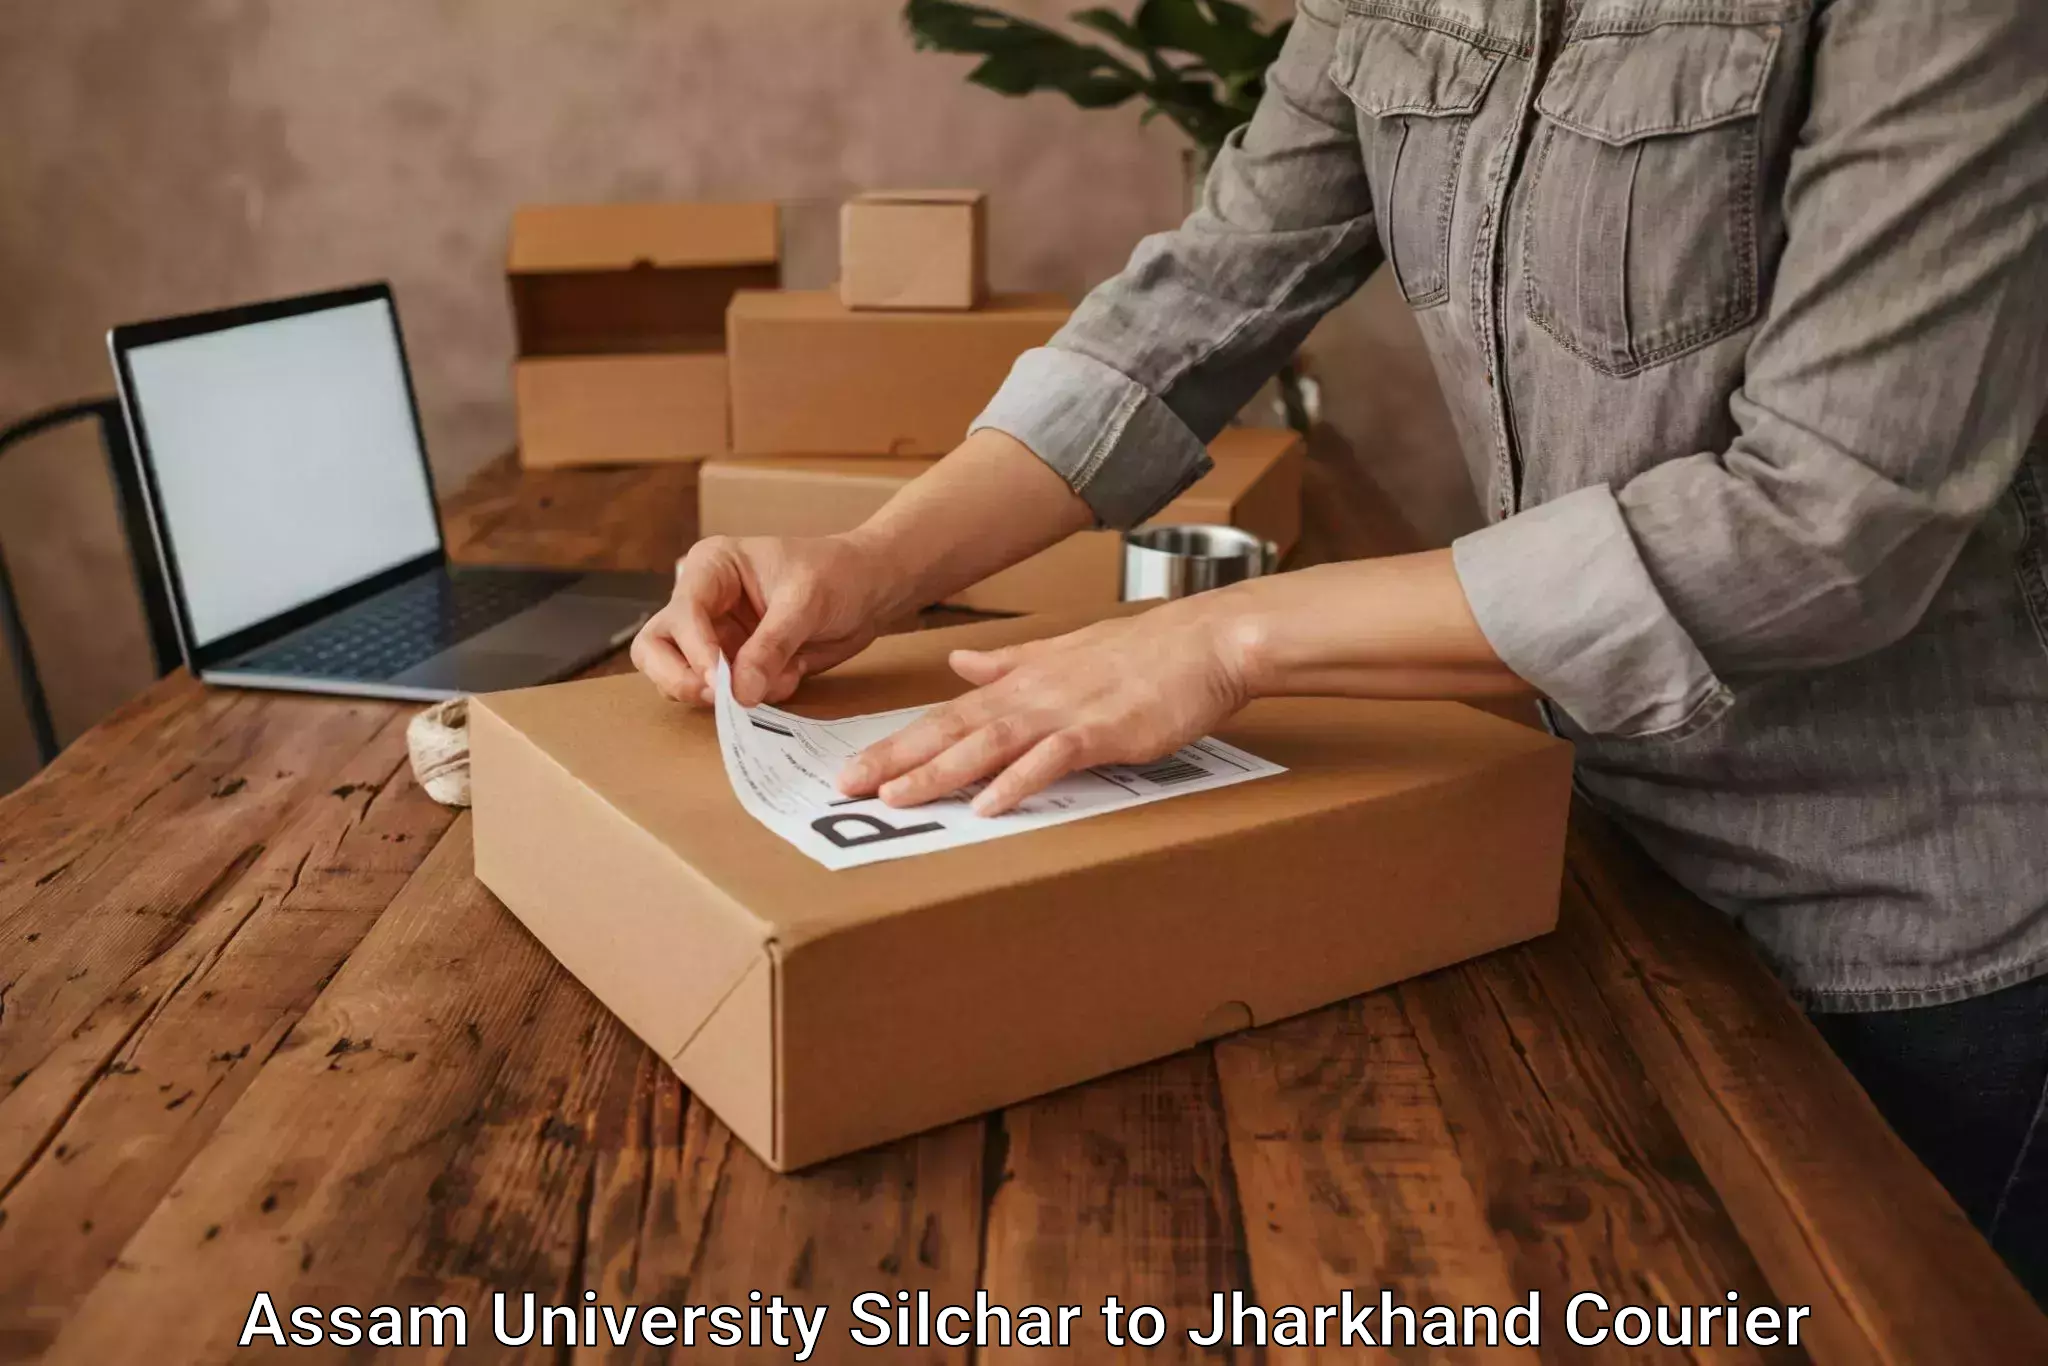 State-of-the-art courier technology Assam University Silchar to Manoharpur